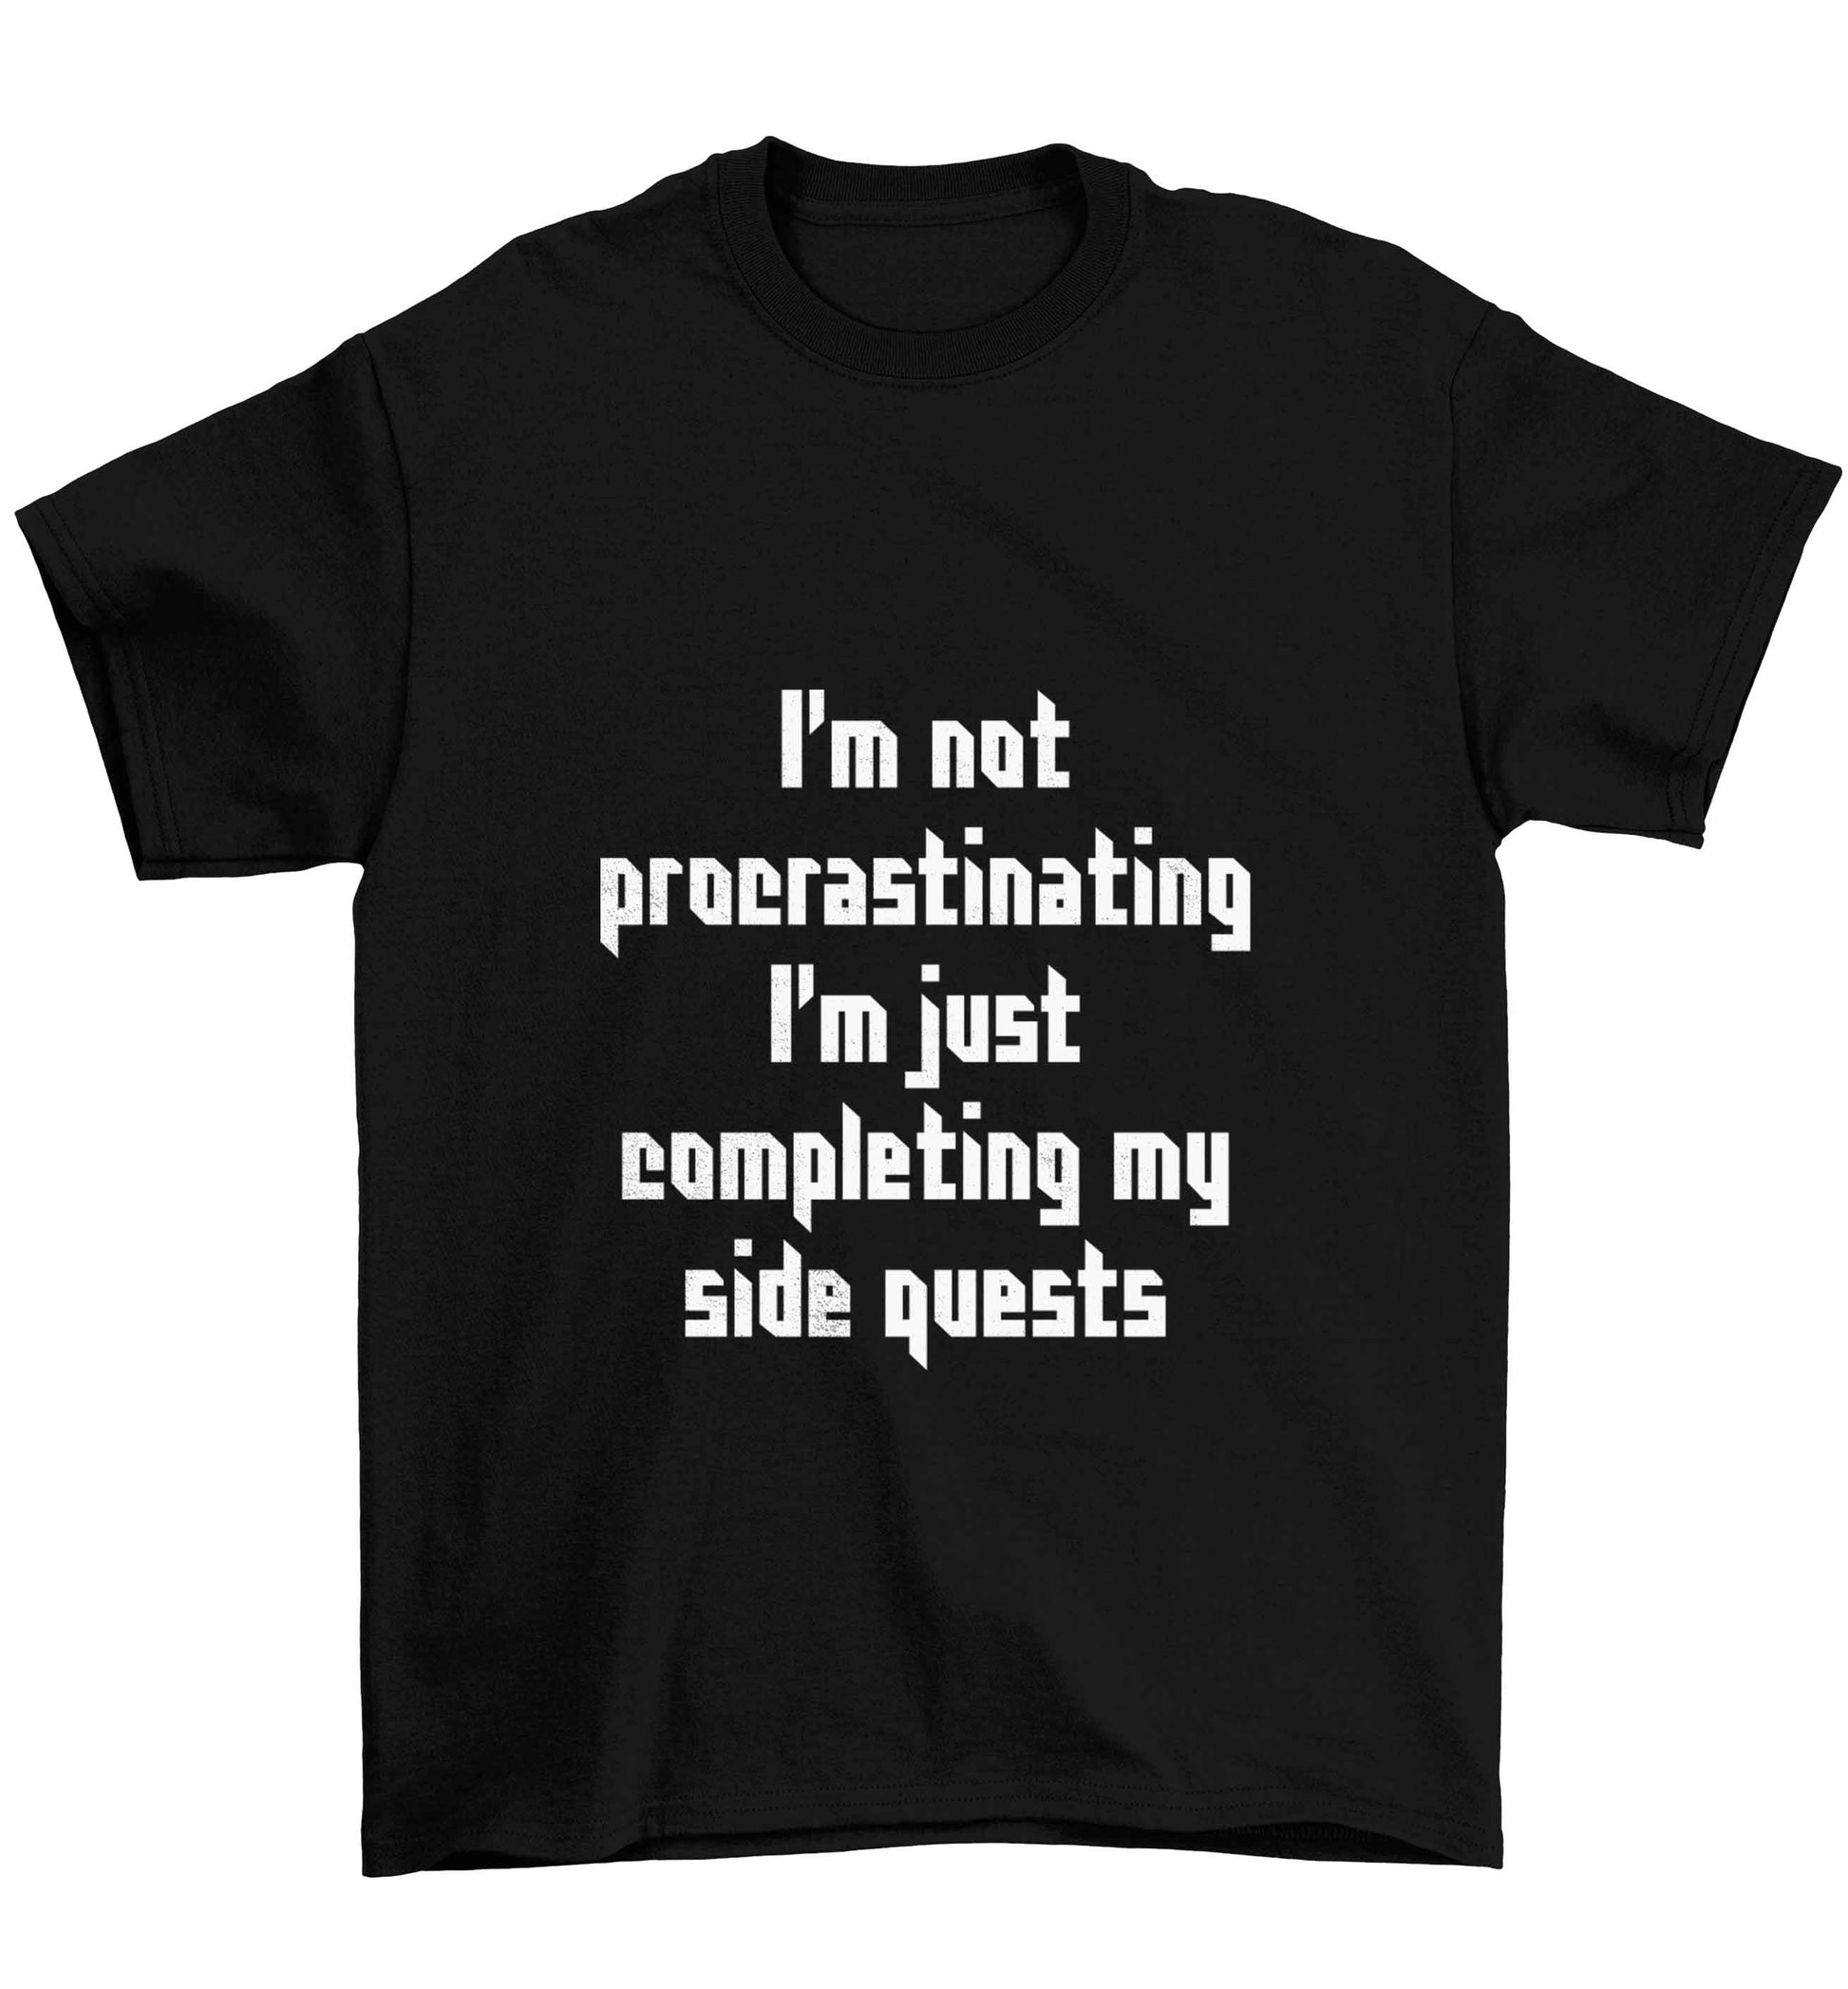 I'm not procrastinating I'm just completing my side quests Children's black Tshirt 12-13 Years